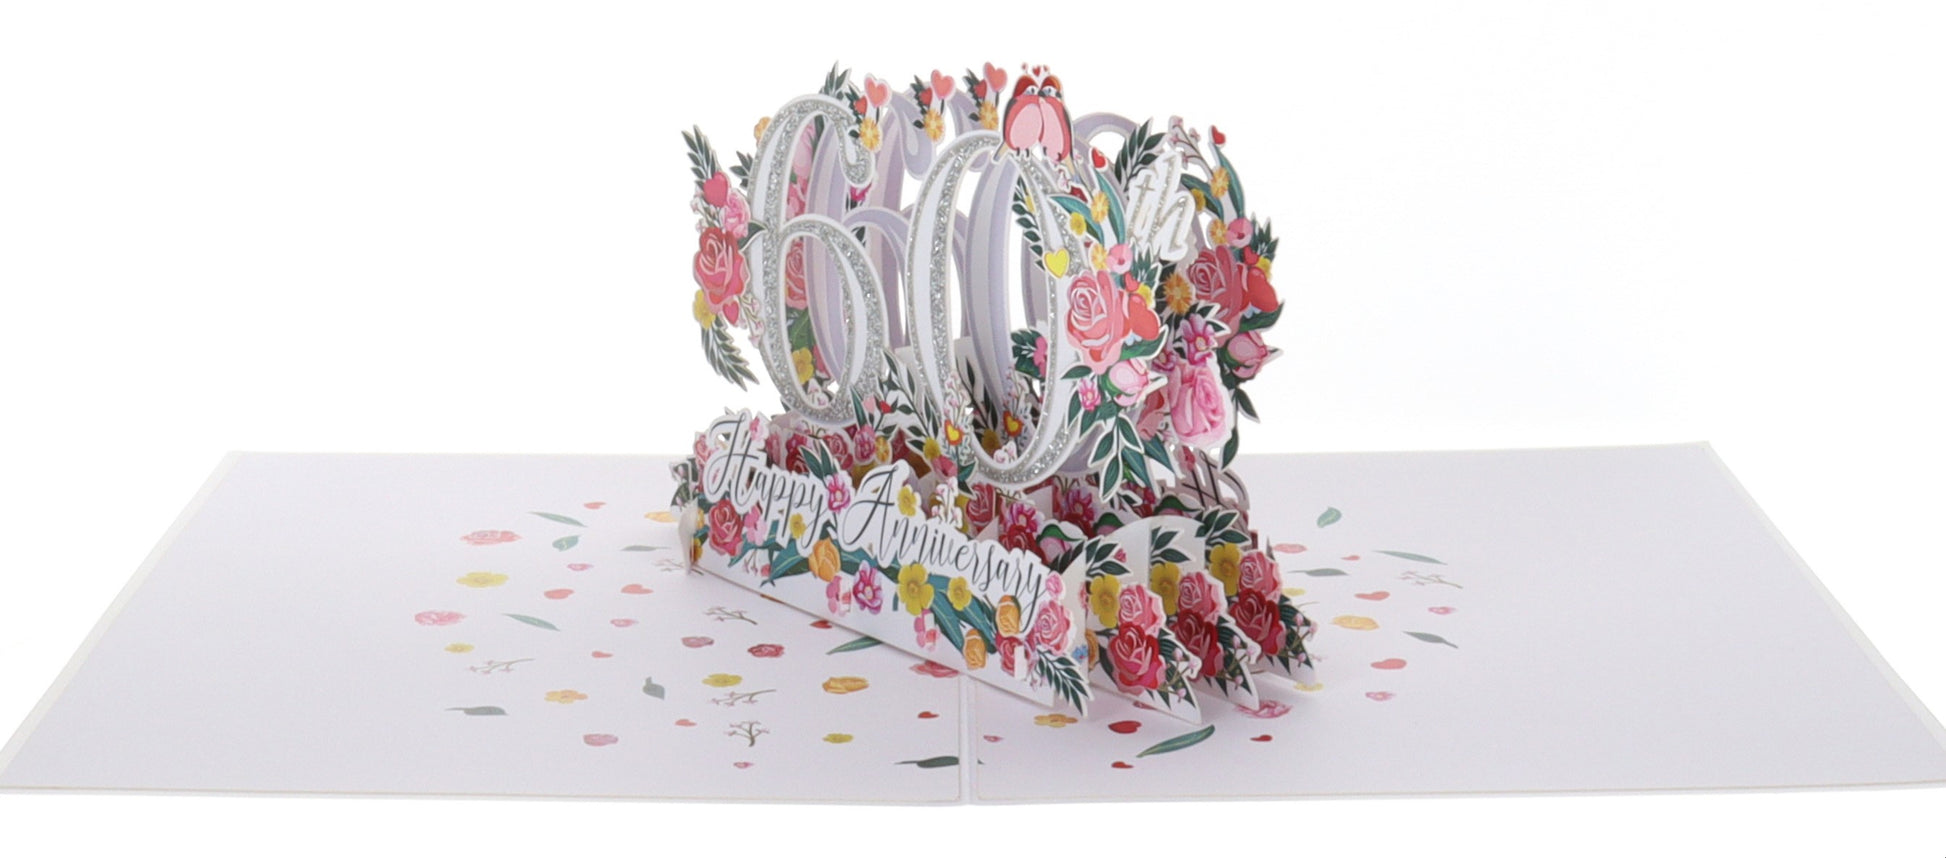 Happy 60th Milestone Anniversary 3D Pop Up Greeting Card - 60th Anniversary Being Together - 60th We - iGifts And Cards